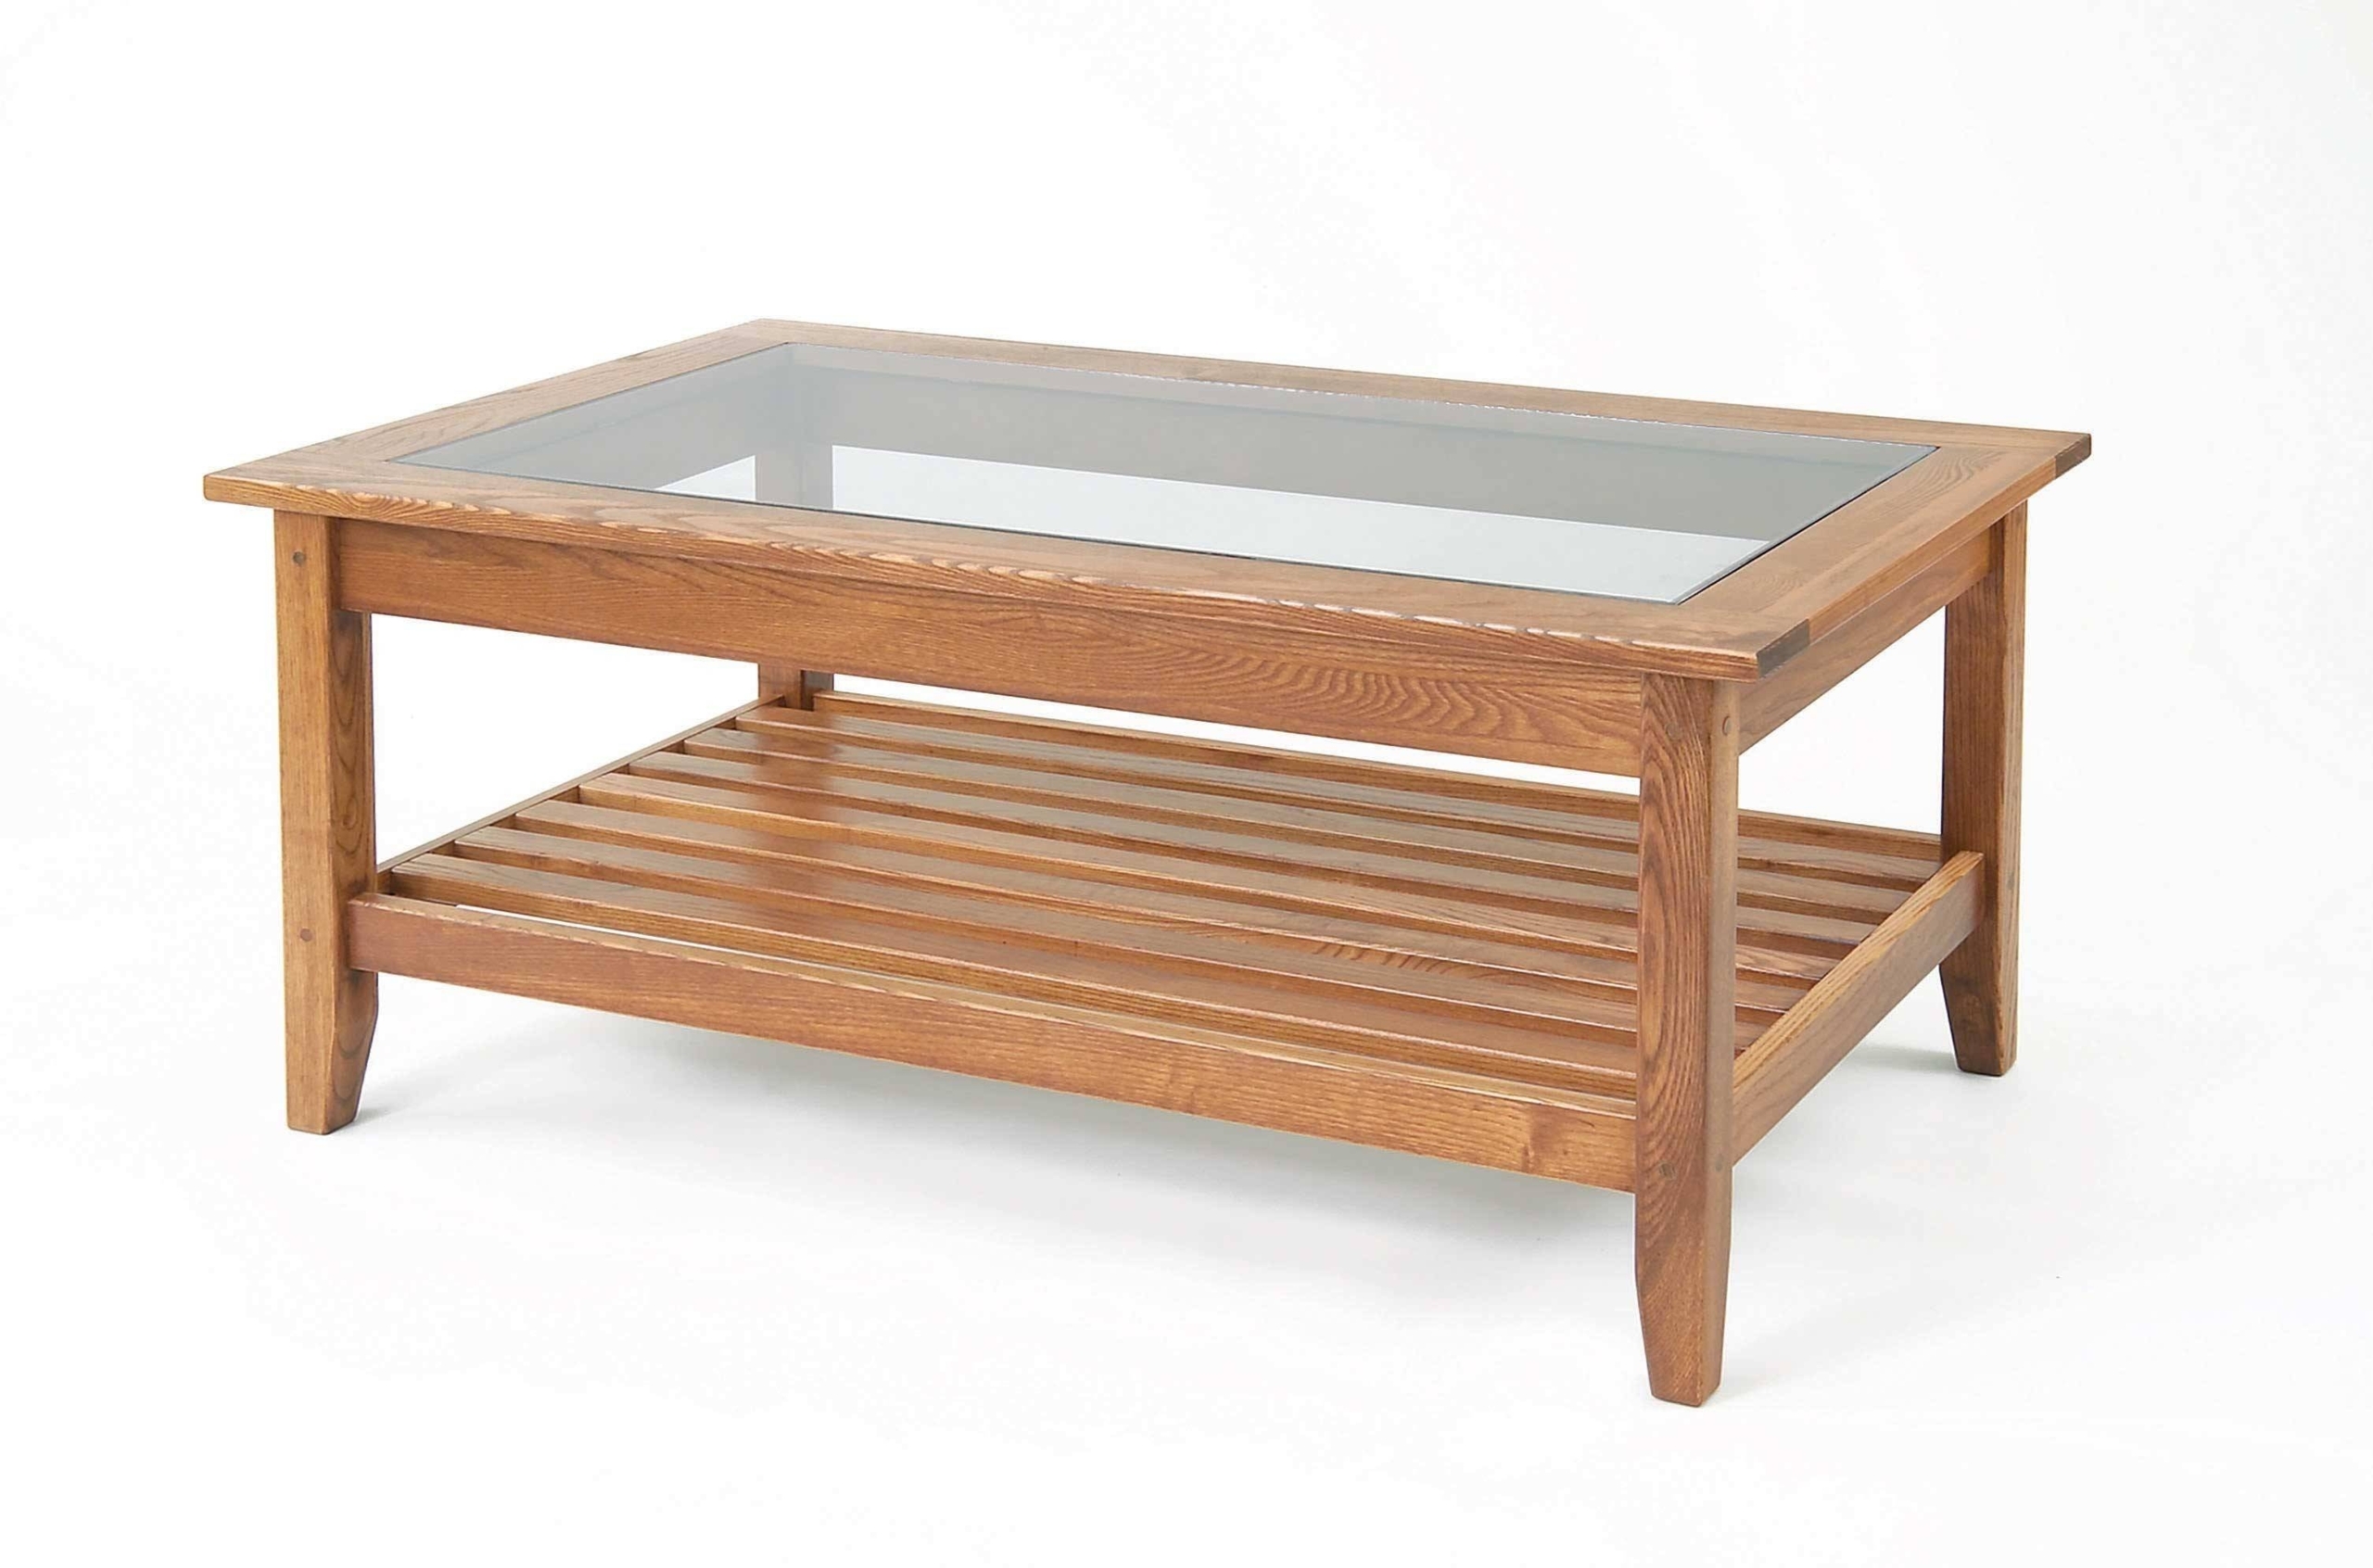 Oak Coffee Table With Glass Top Ideas On Foter